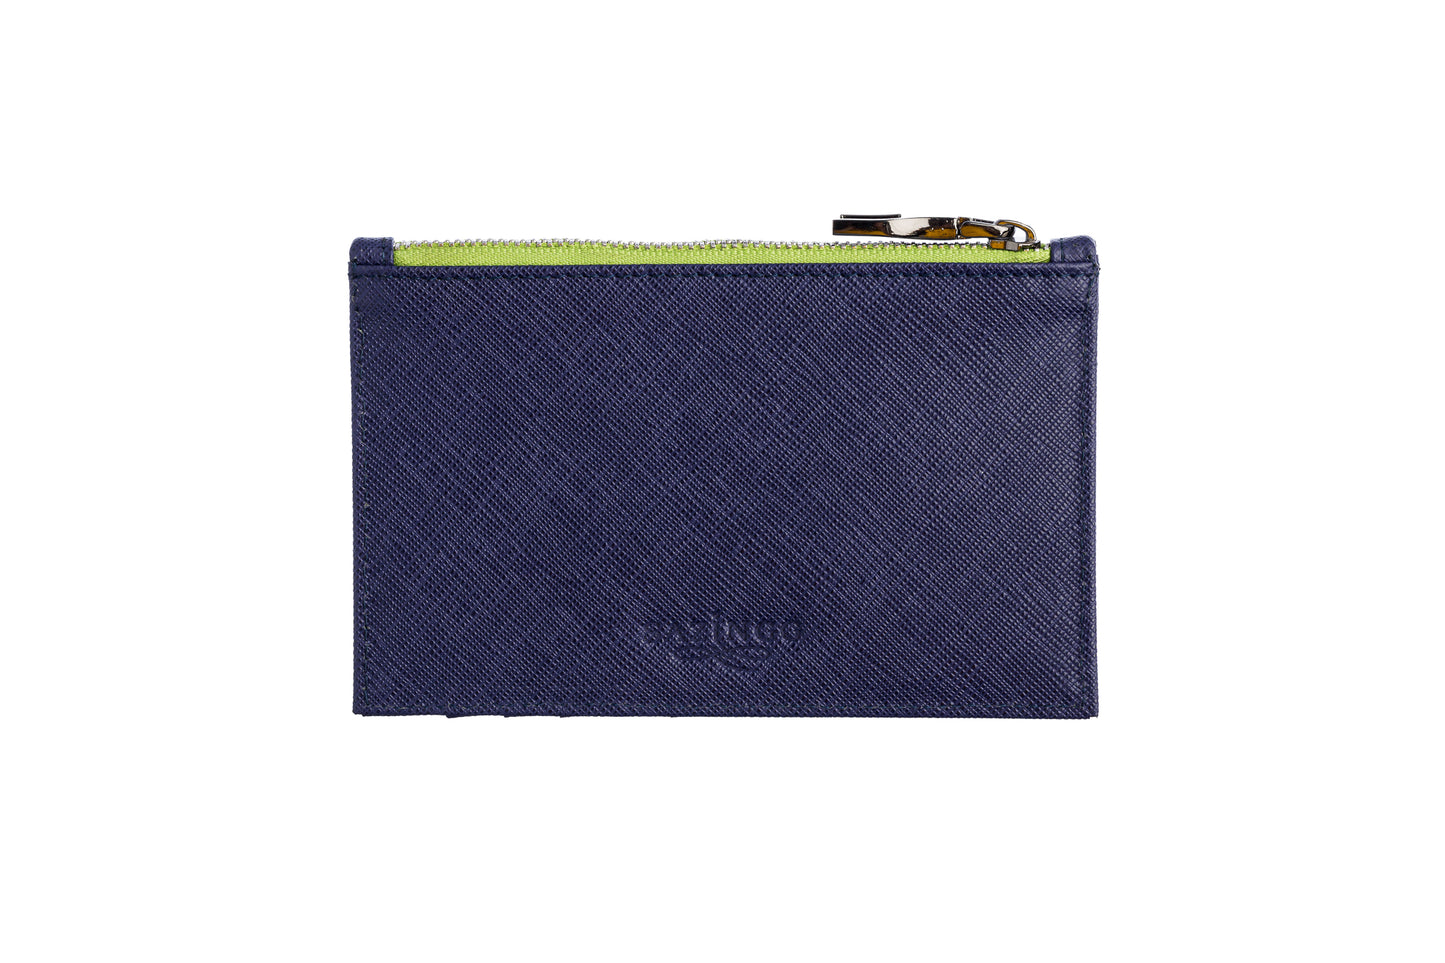 Credit Card Zip Pouch in Blue Textured Leather